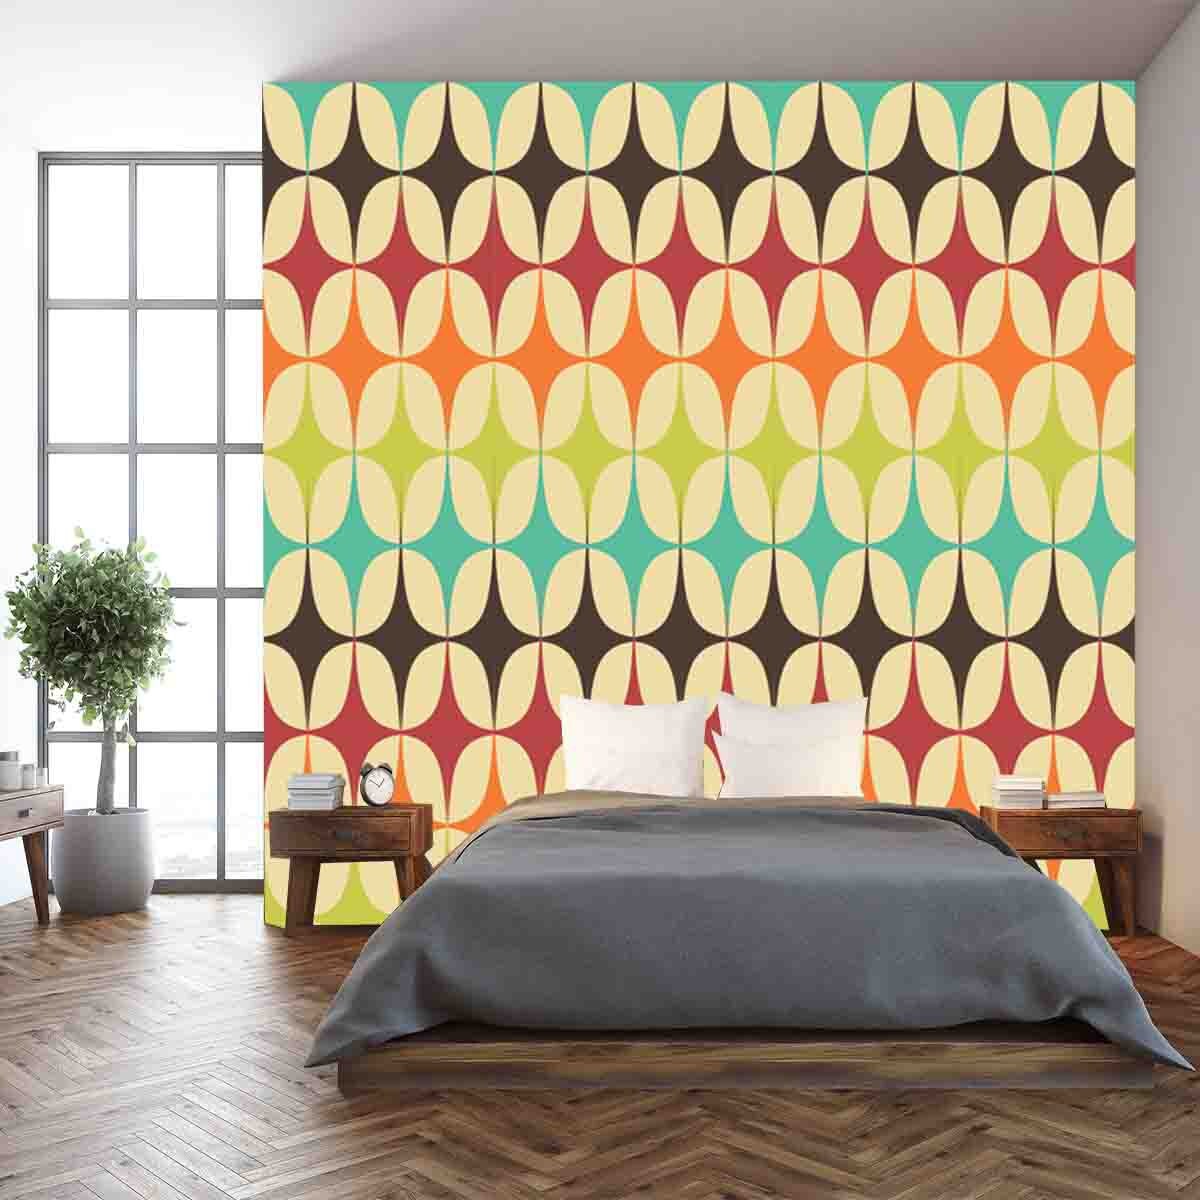 Abstract Retro Geometric Seamless Pattern with Triangles Wallpaper Bedroom Mural